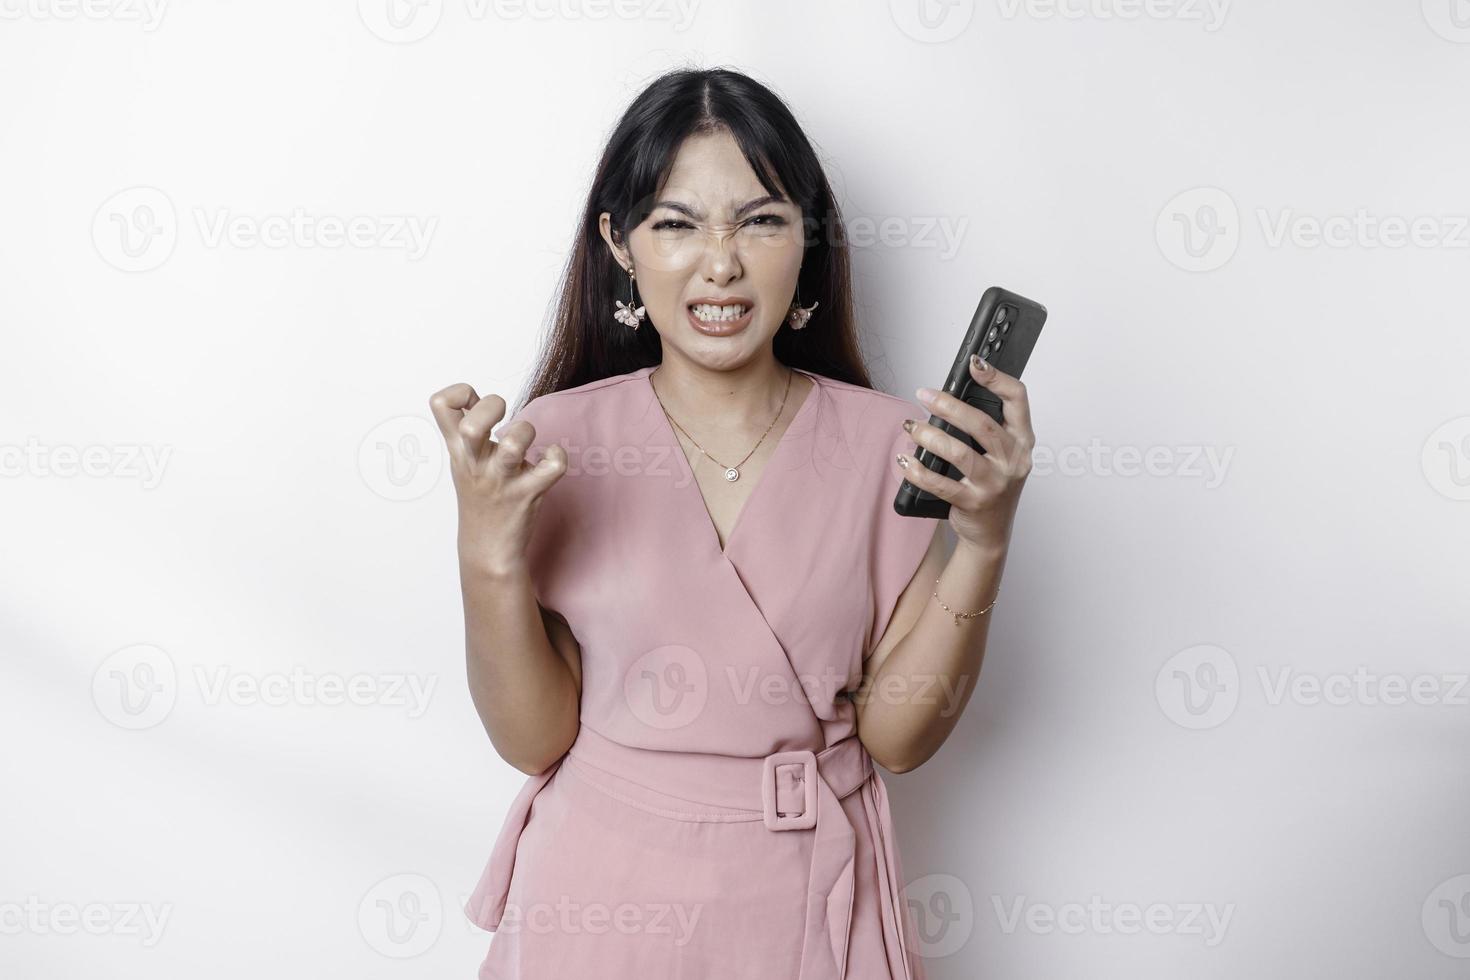 A dissatisfied young Asian woman dressed in pink, looks disgruntled with irritated face expressions holding her phone photo